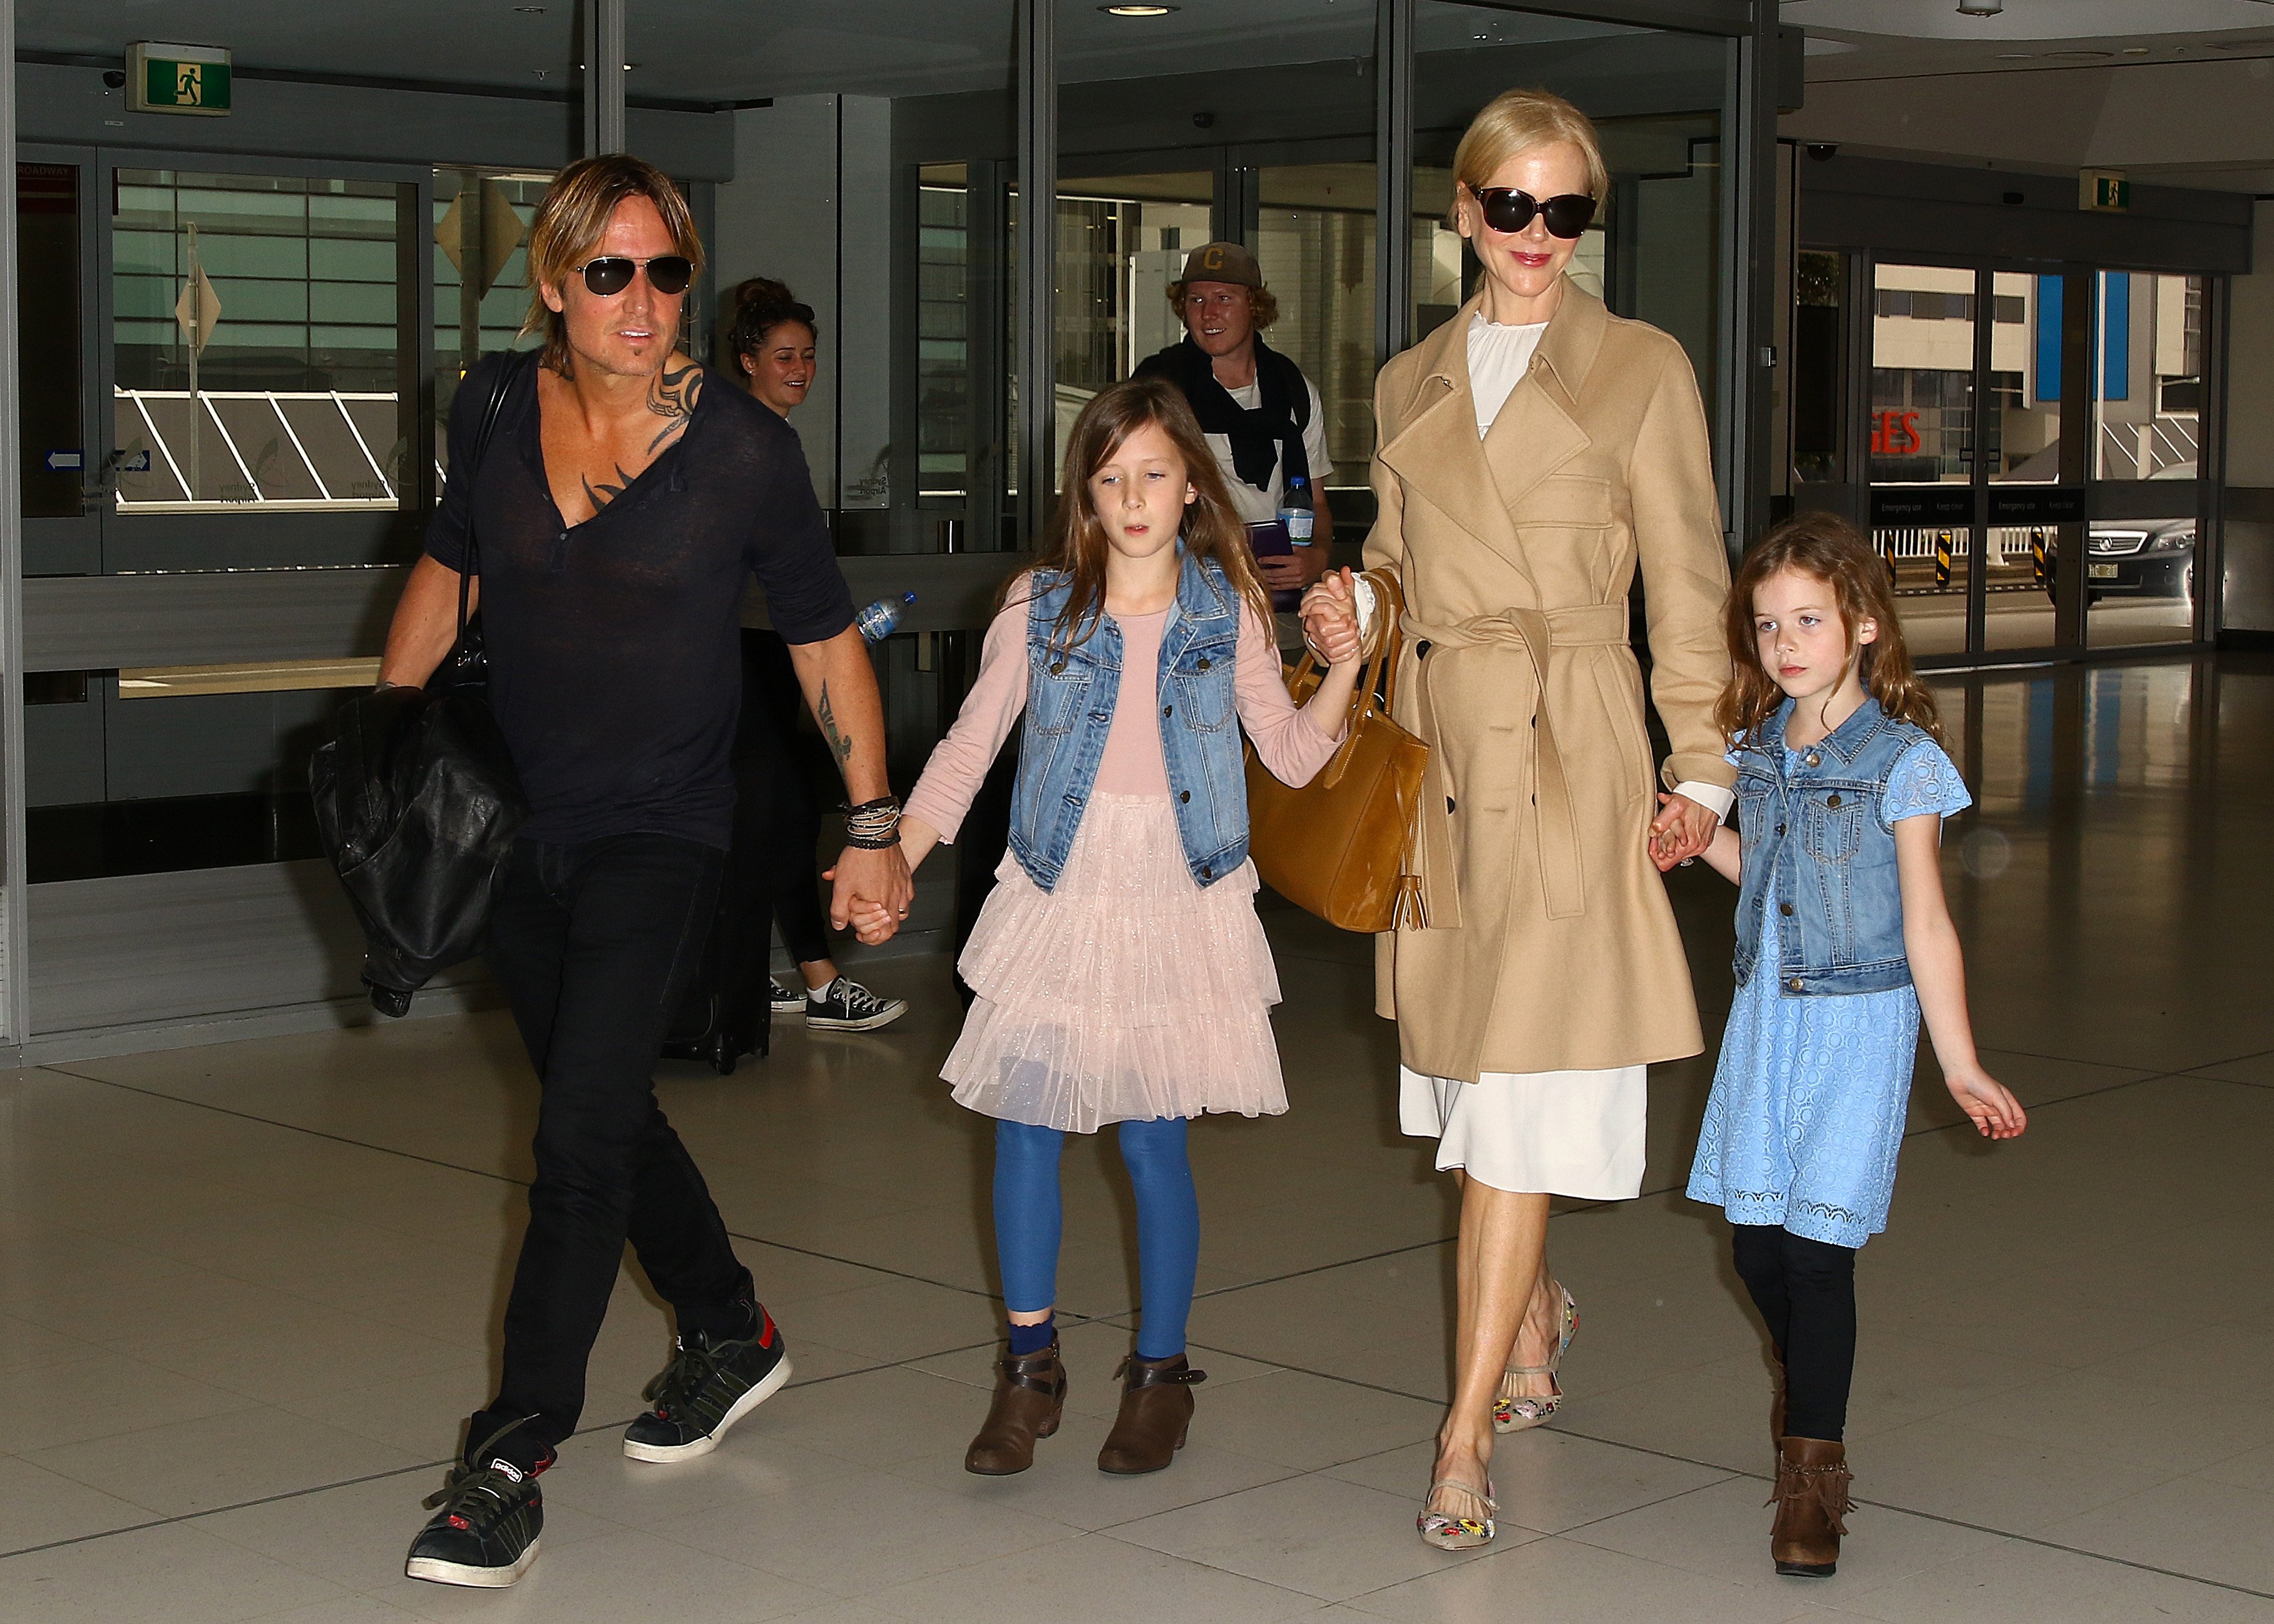 Nicole Kidman and Keith Urban arrive at the Sydney International Airport with their daughters Faith Margaret and Sunday Rose on March 28, 2017, in Sydney, Australia.. | Source: Getty Images